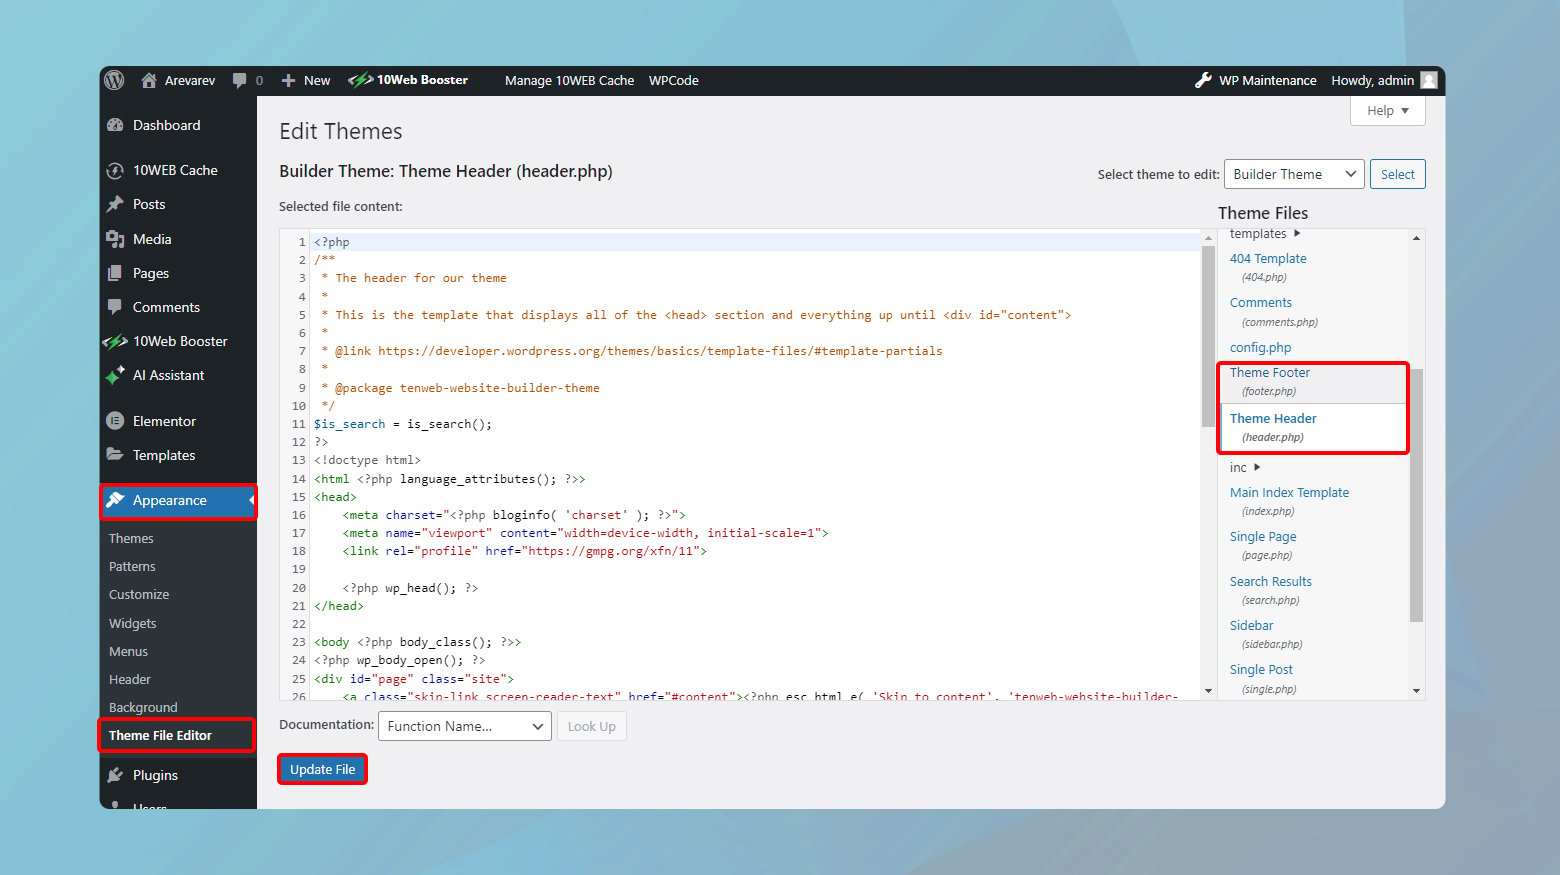 Theme File Editor in WordPress with Header and Footer highlighted.